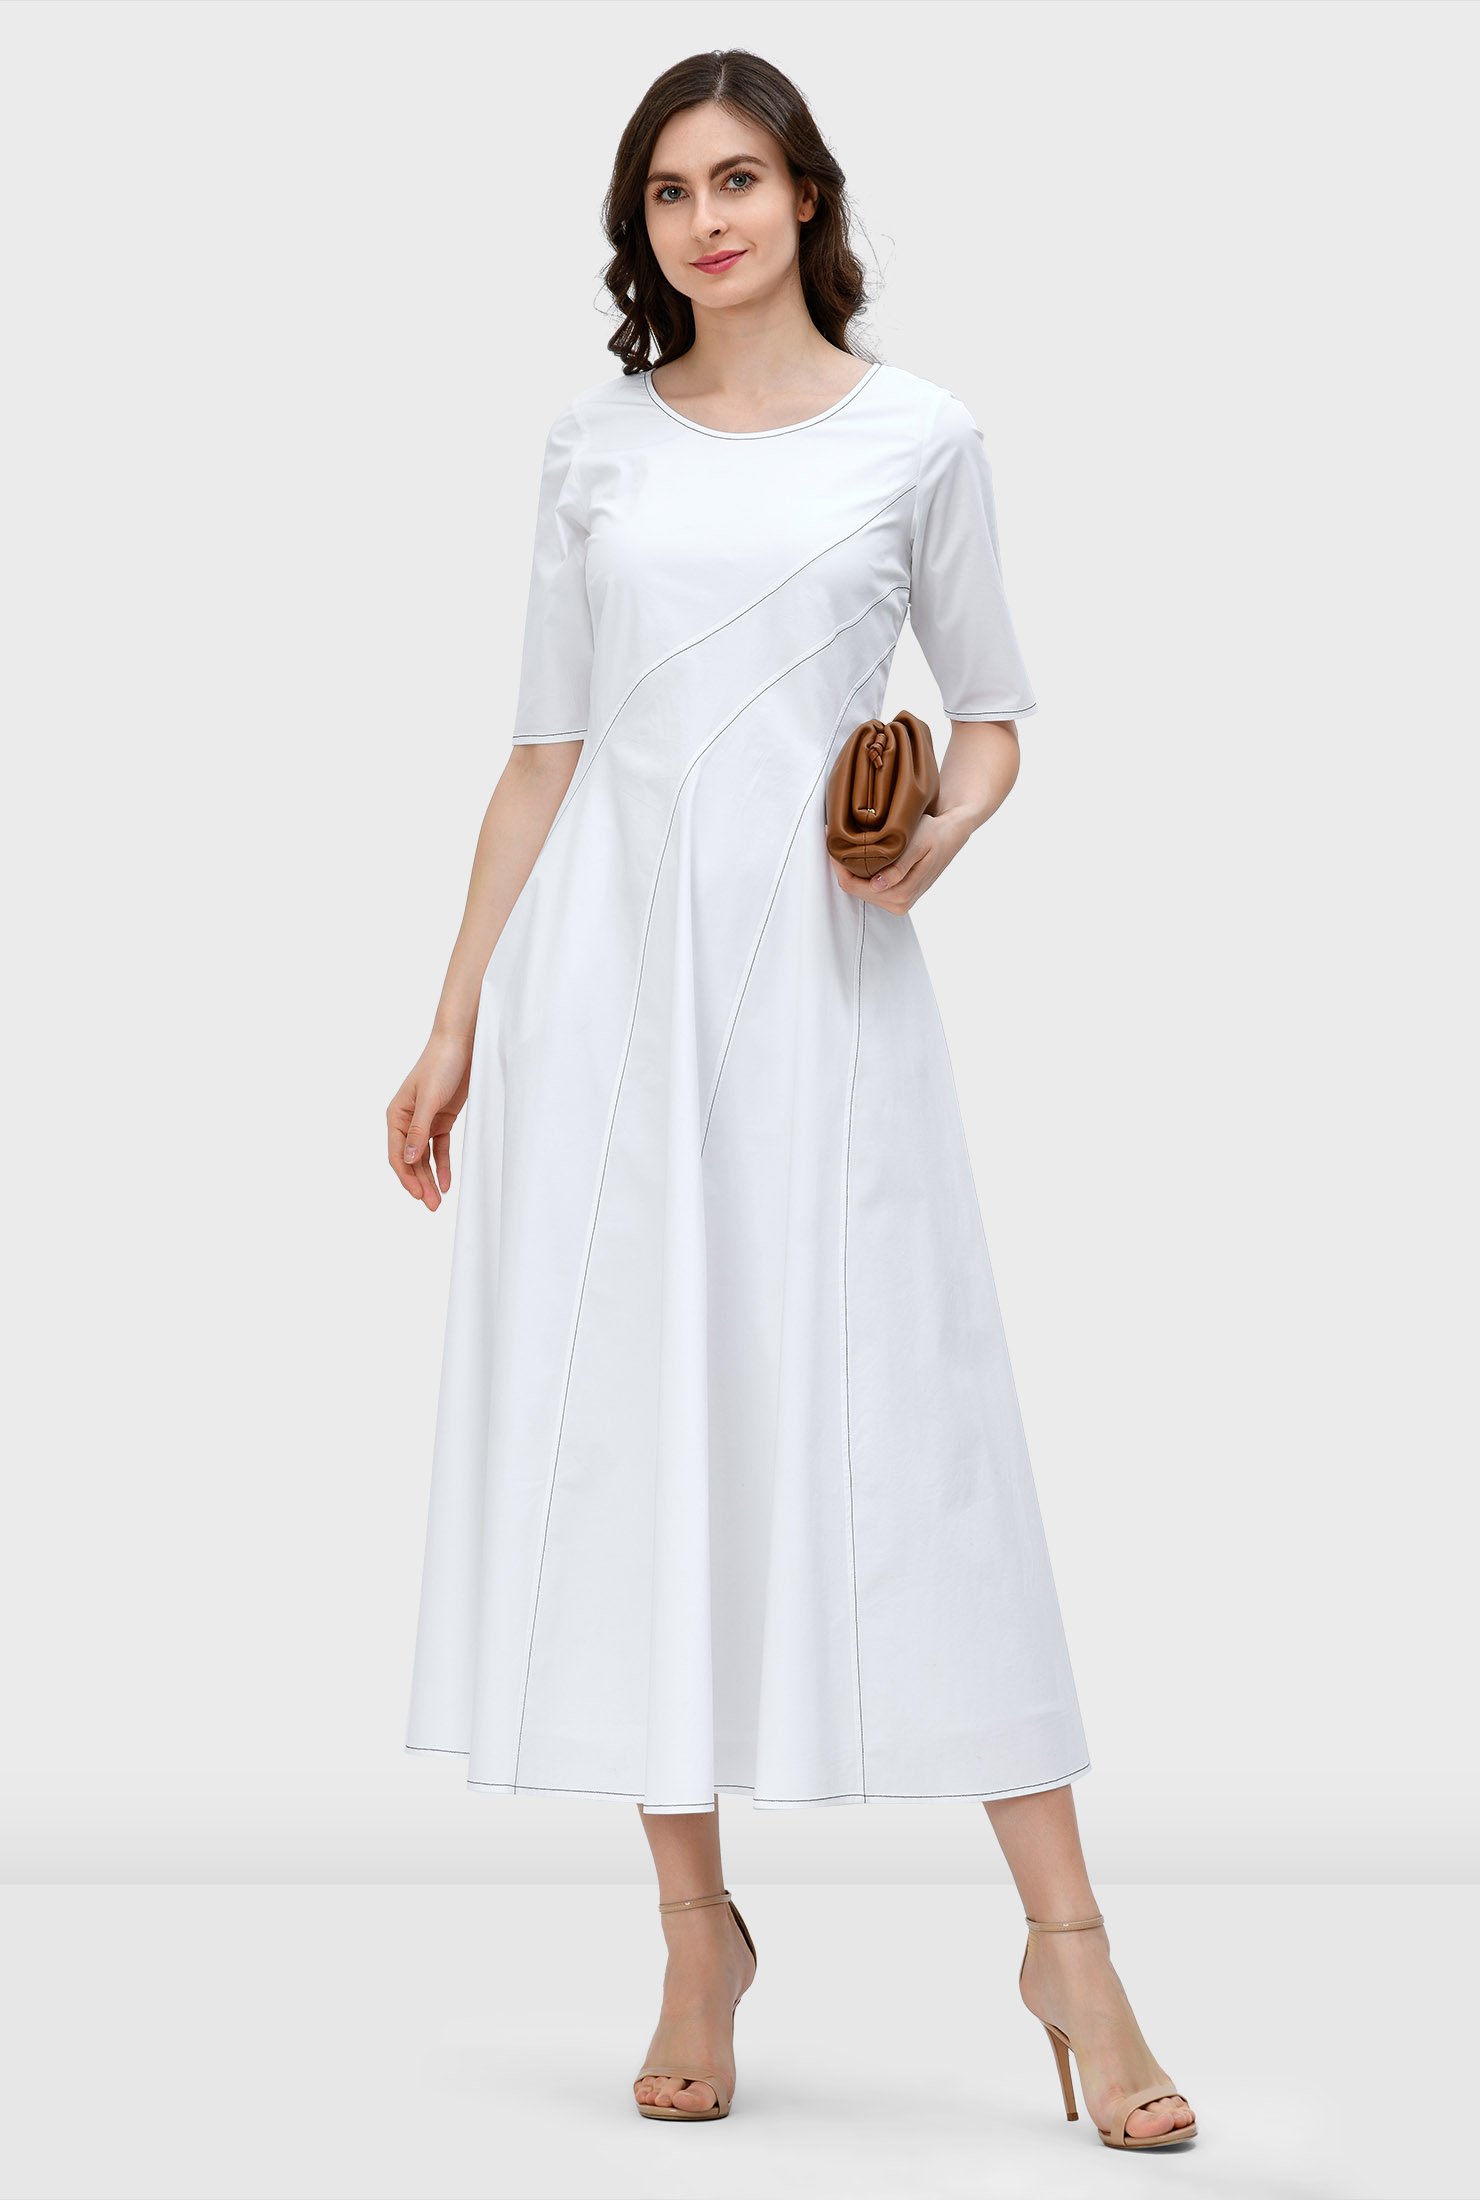 Our crisp cotton poplin dress is designed to flatter and enhance with asymmetric seams from the top to the full flare skirt and down to the contrast top-stitched hem.